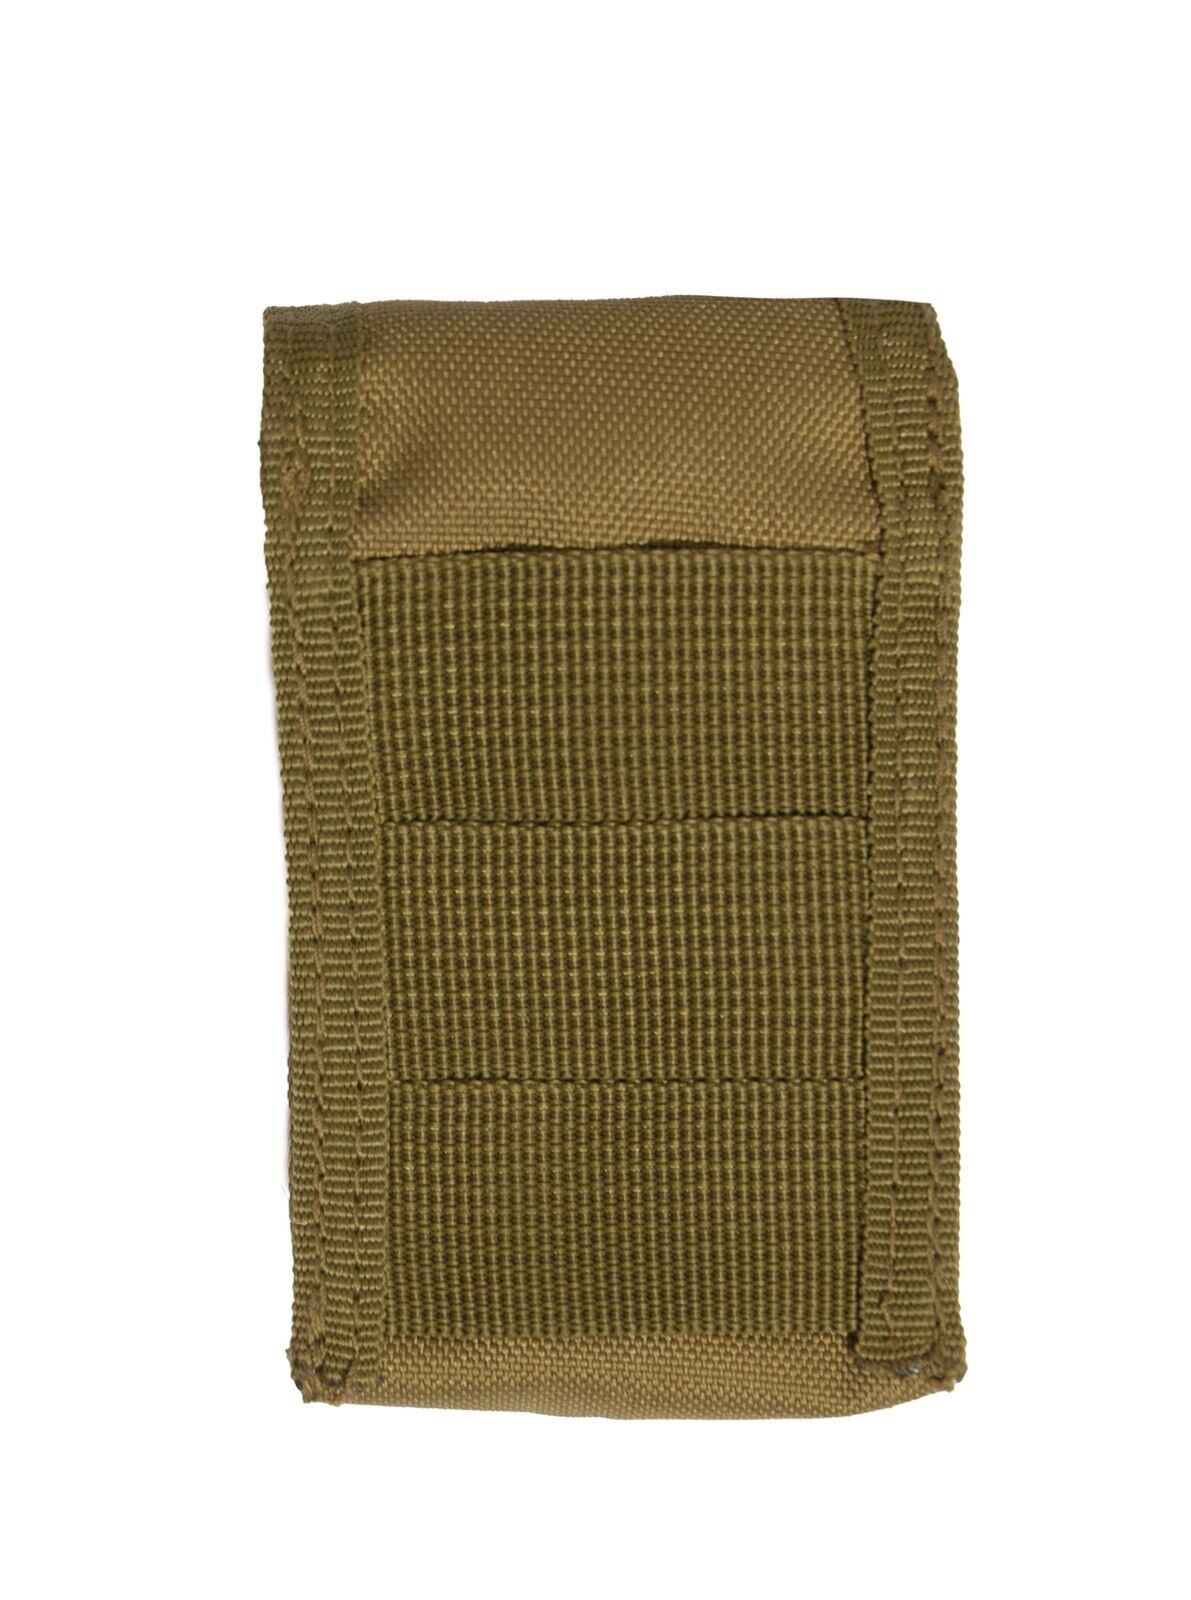 Tactical MOLLE Strobe GPS Compass Utility Pouch